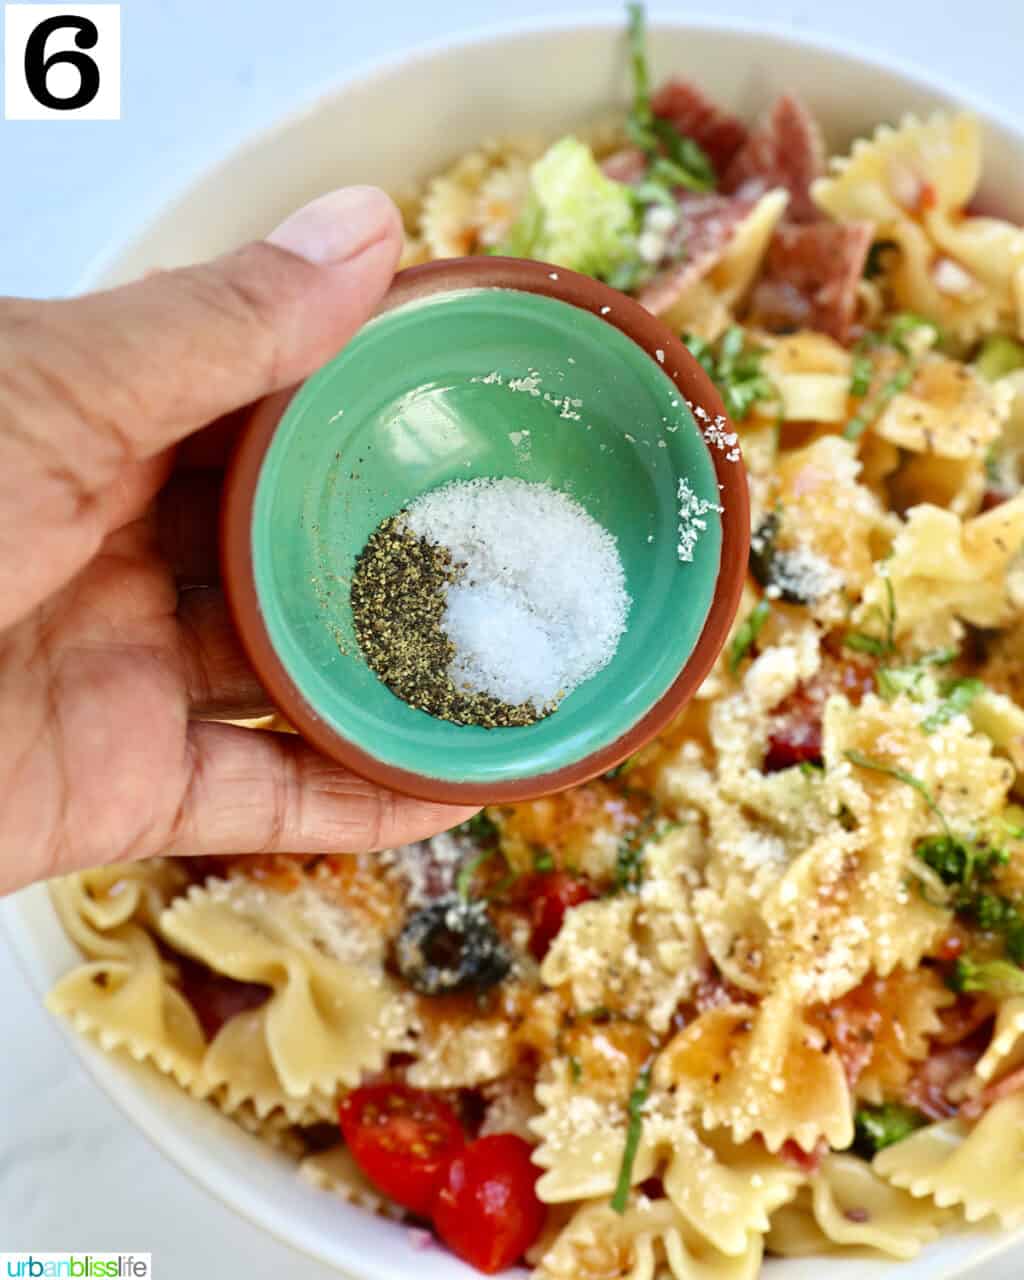 hand holding a small bowl of salt and pepper over a large bowl of Italian pasta salad.